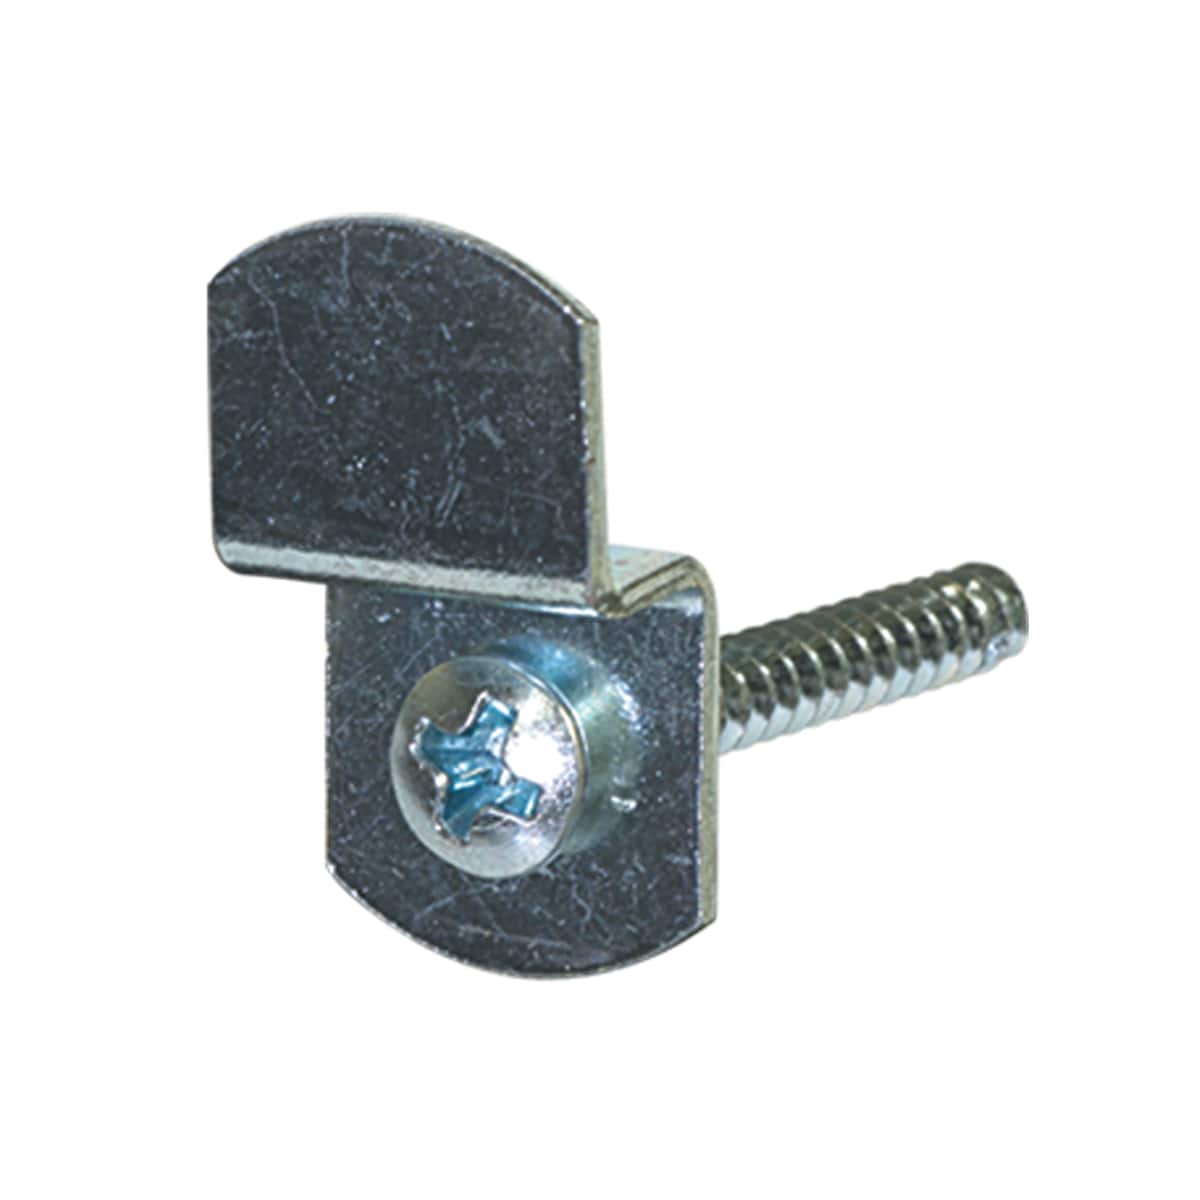 OOK 50228 1/4-Inch Offset Clip with Hardware